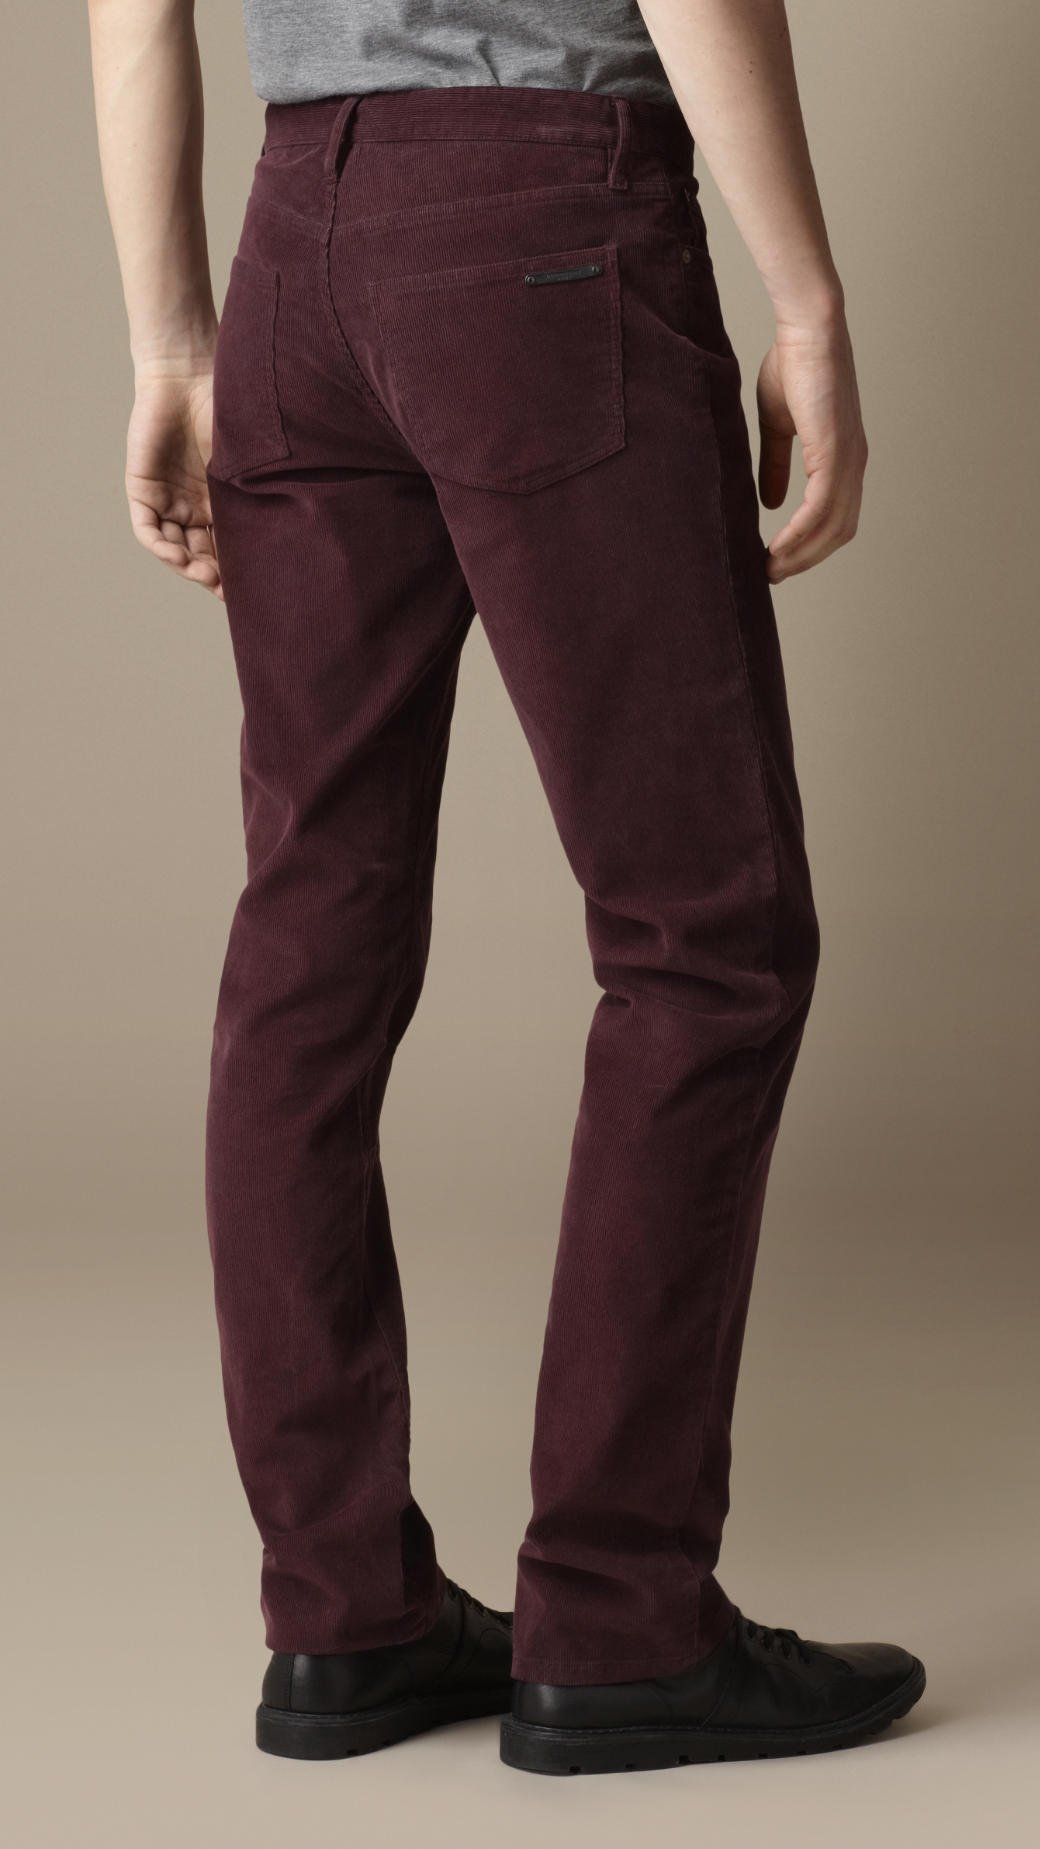 Burberry Slim Fit Corduroy Trousers in Brown for Men - Lyst